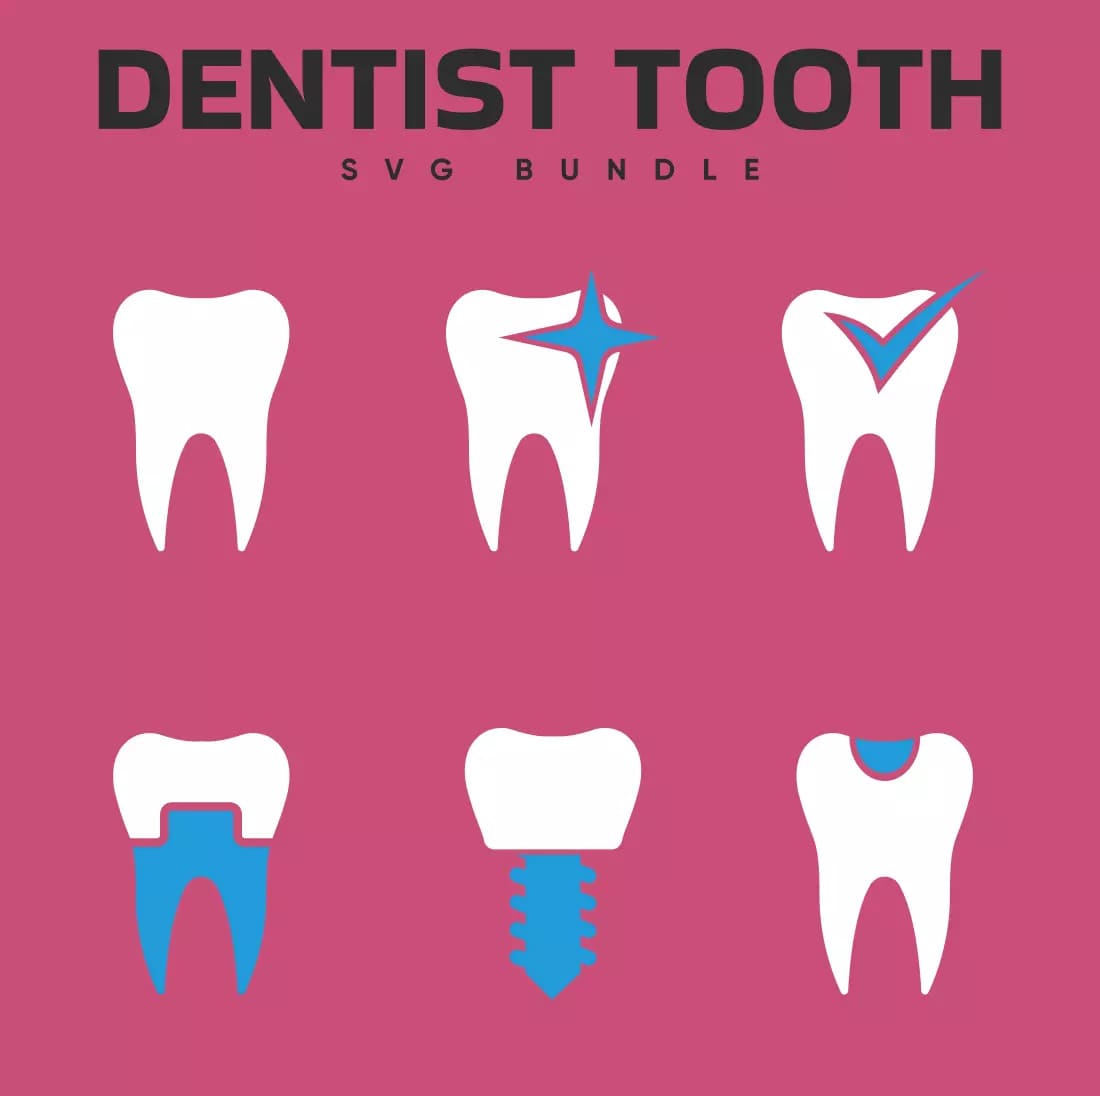 Dentist Tooth SVG Bundle Preview.